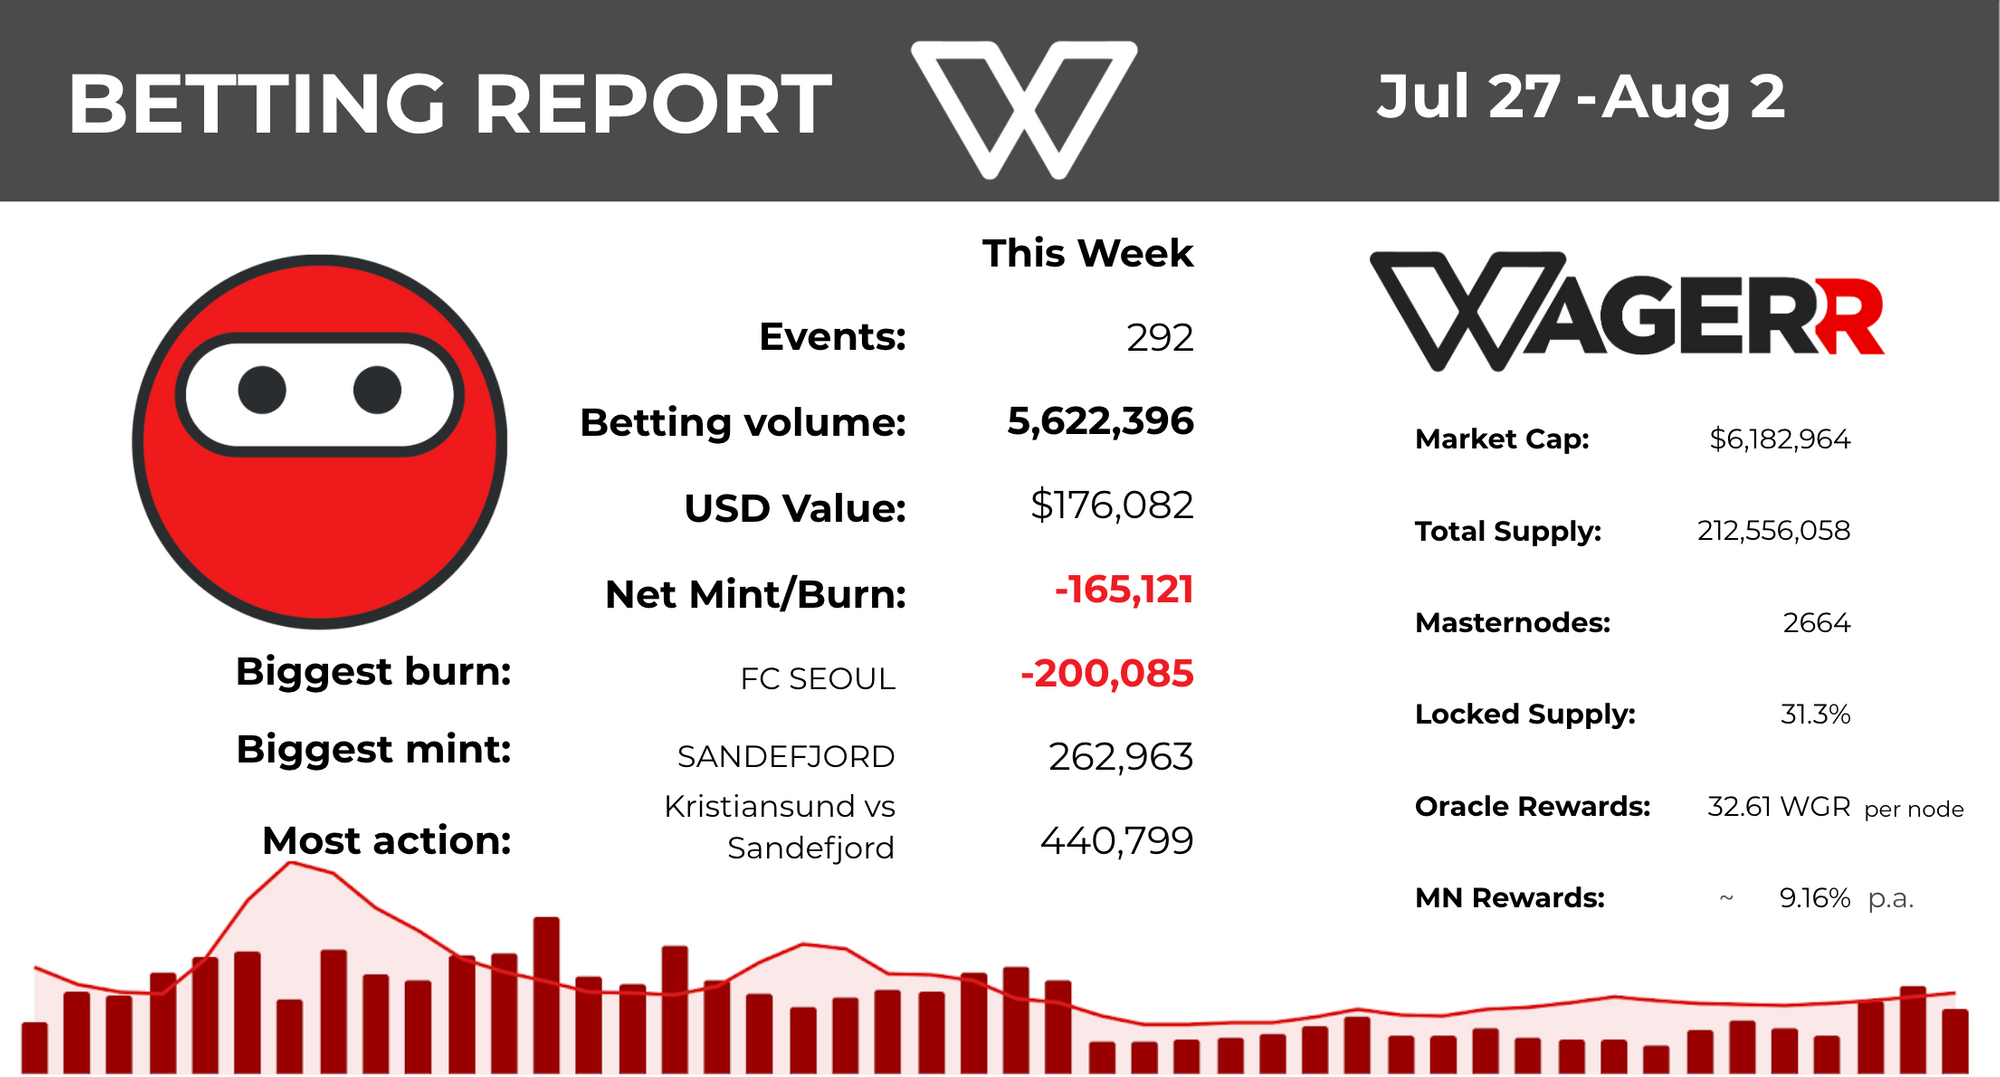 Wagerr Betting Report: August 2